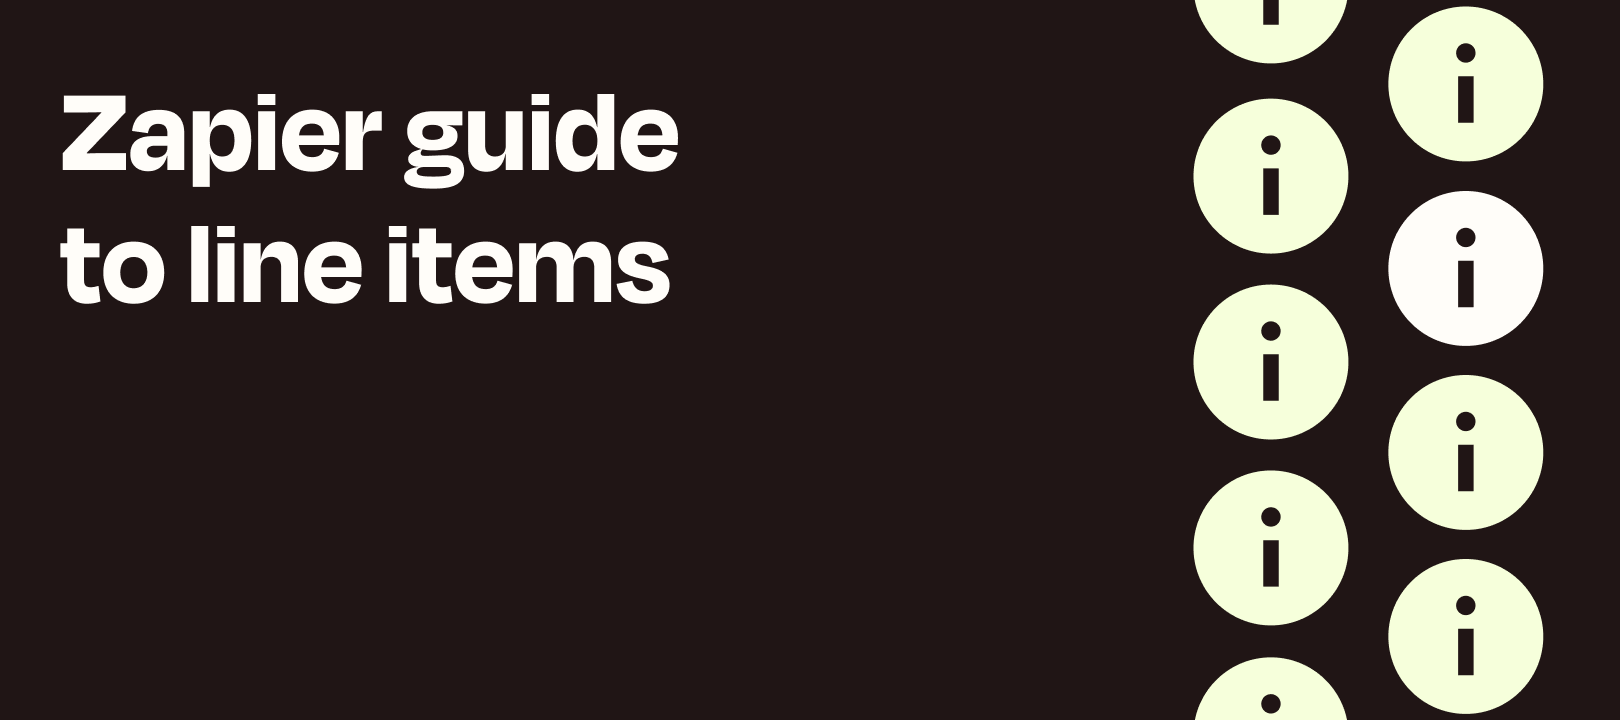 The Zapier guide to line items